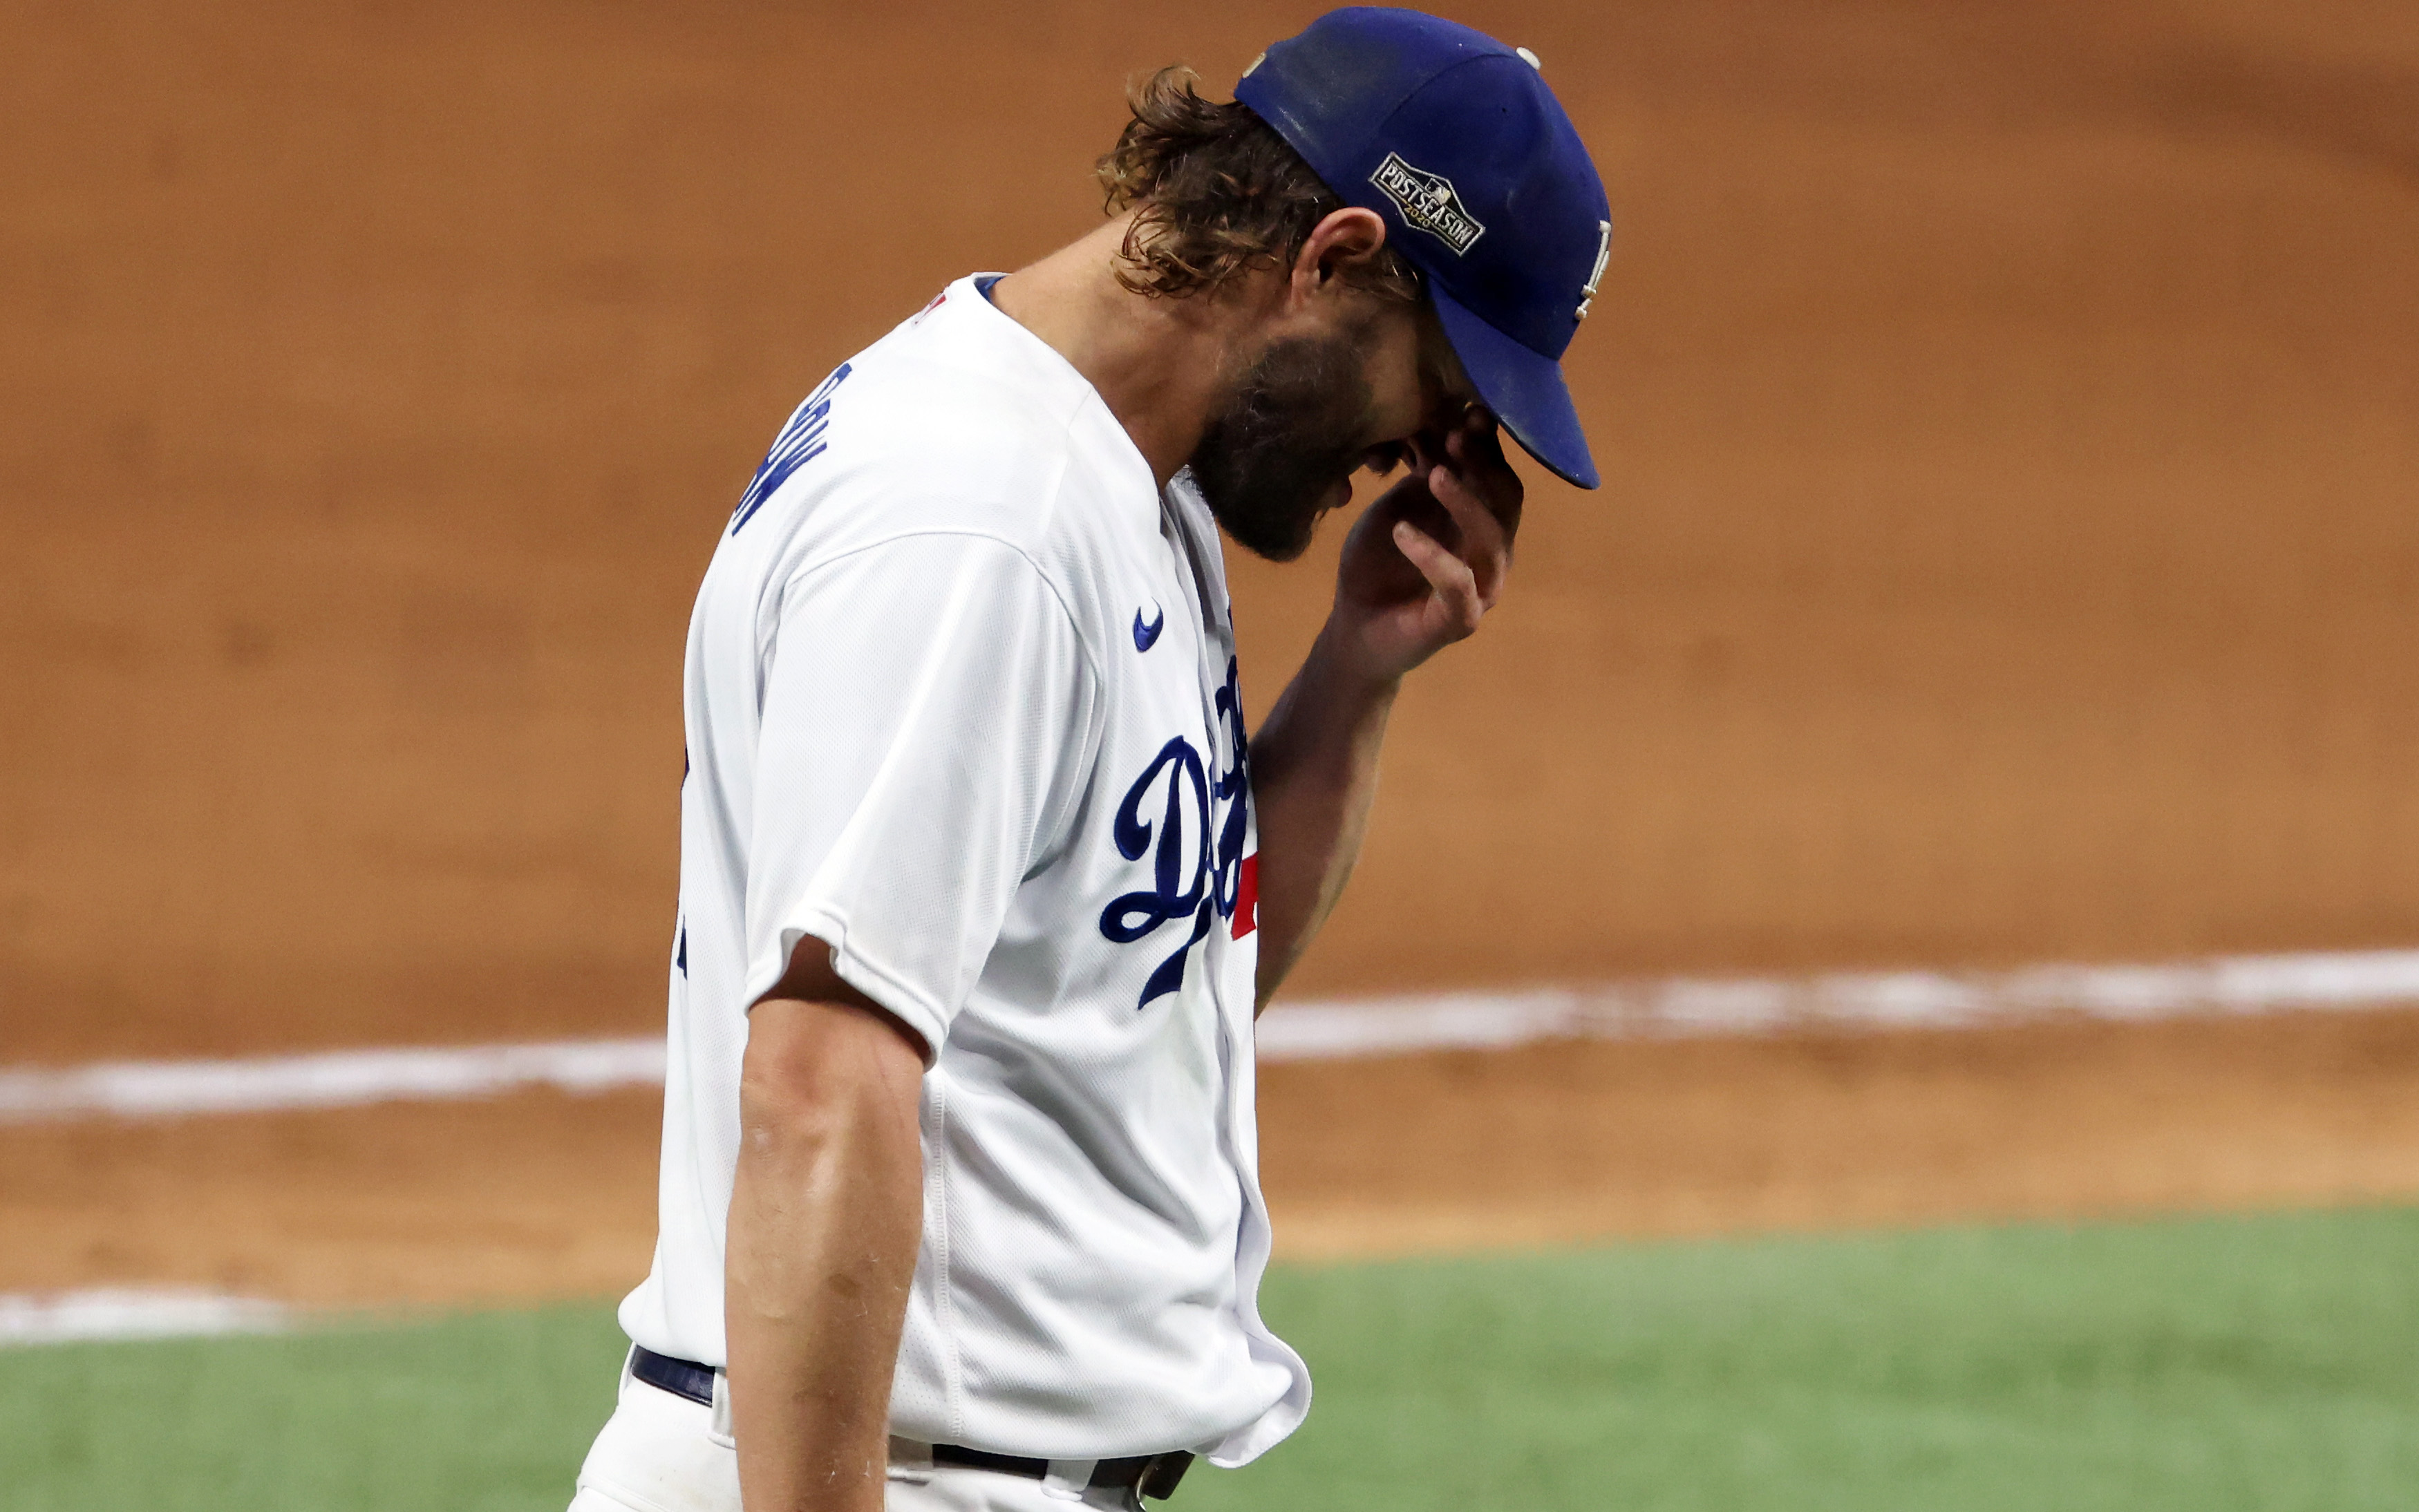 Dodgers News: Watch Clayton Kershaw Warm-Up in the Bullpen for All